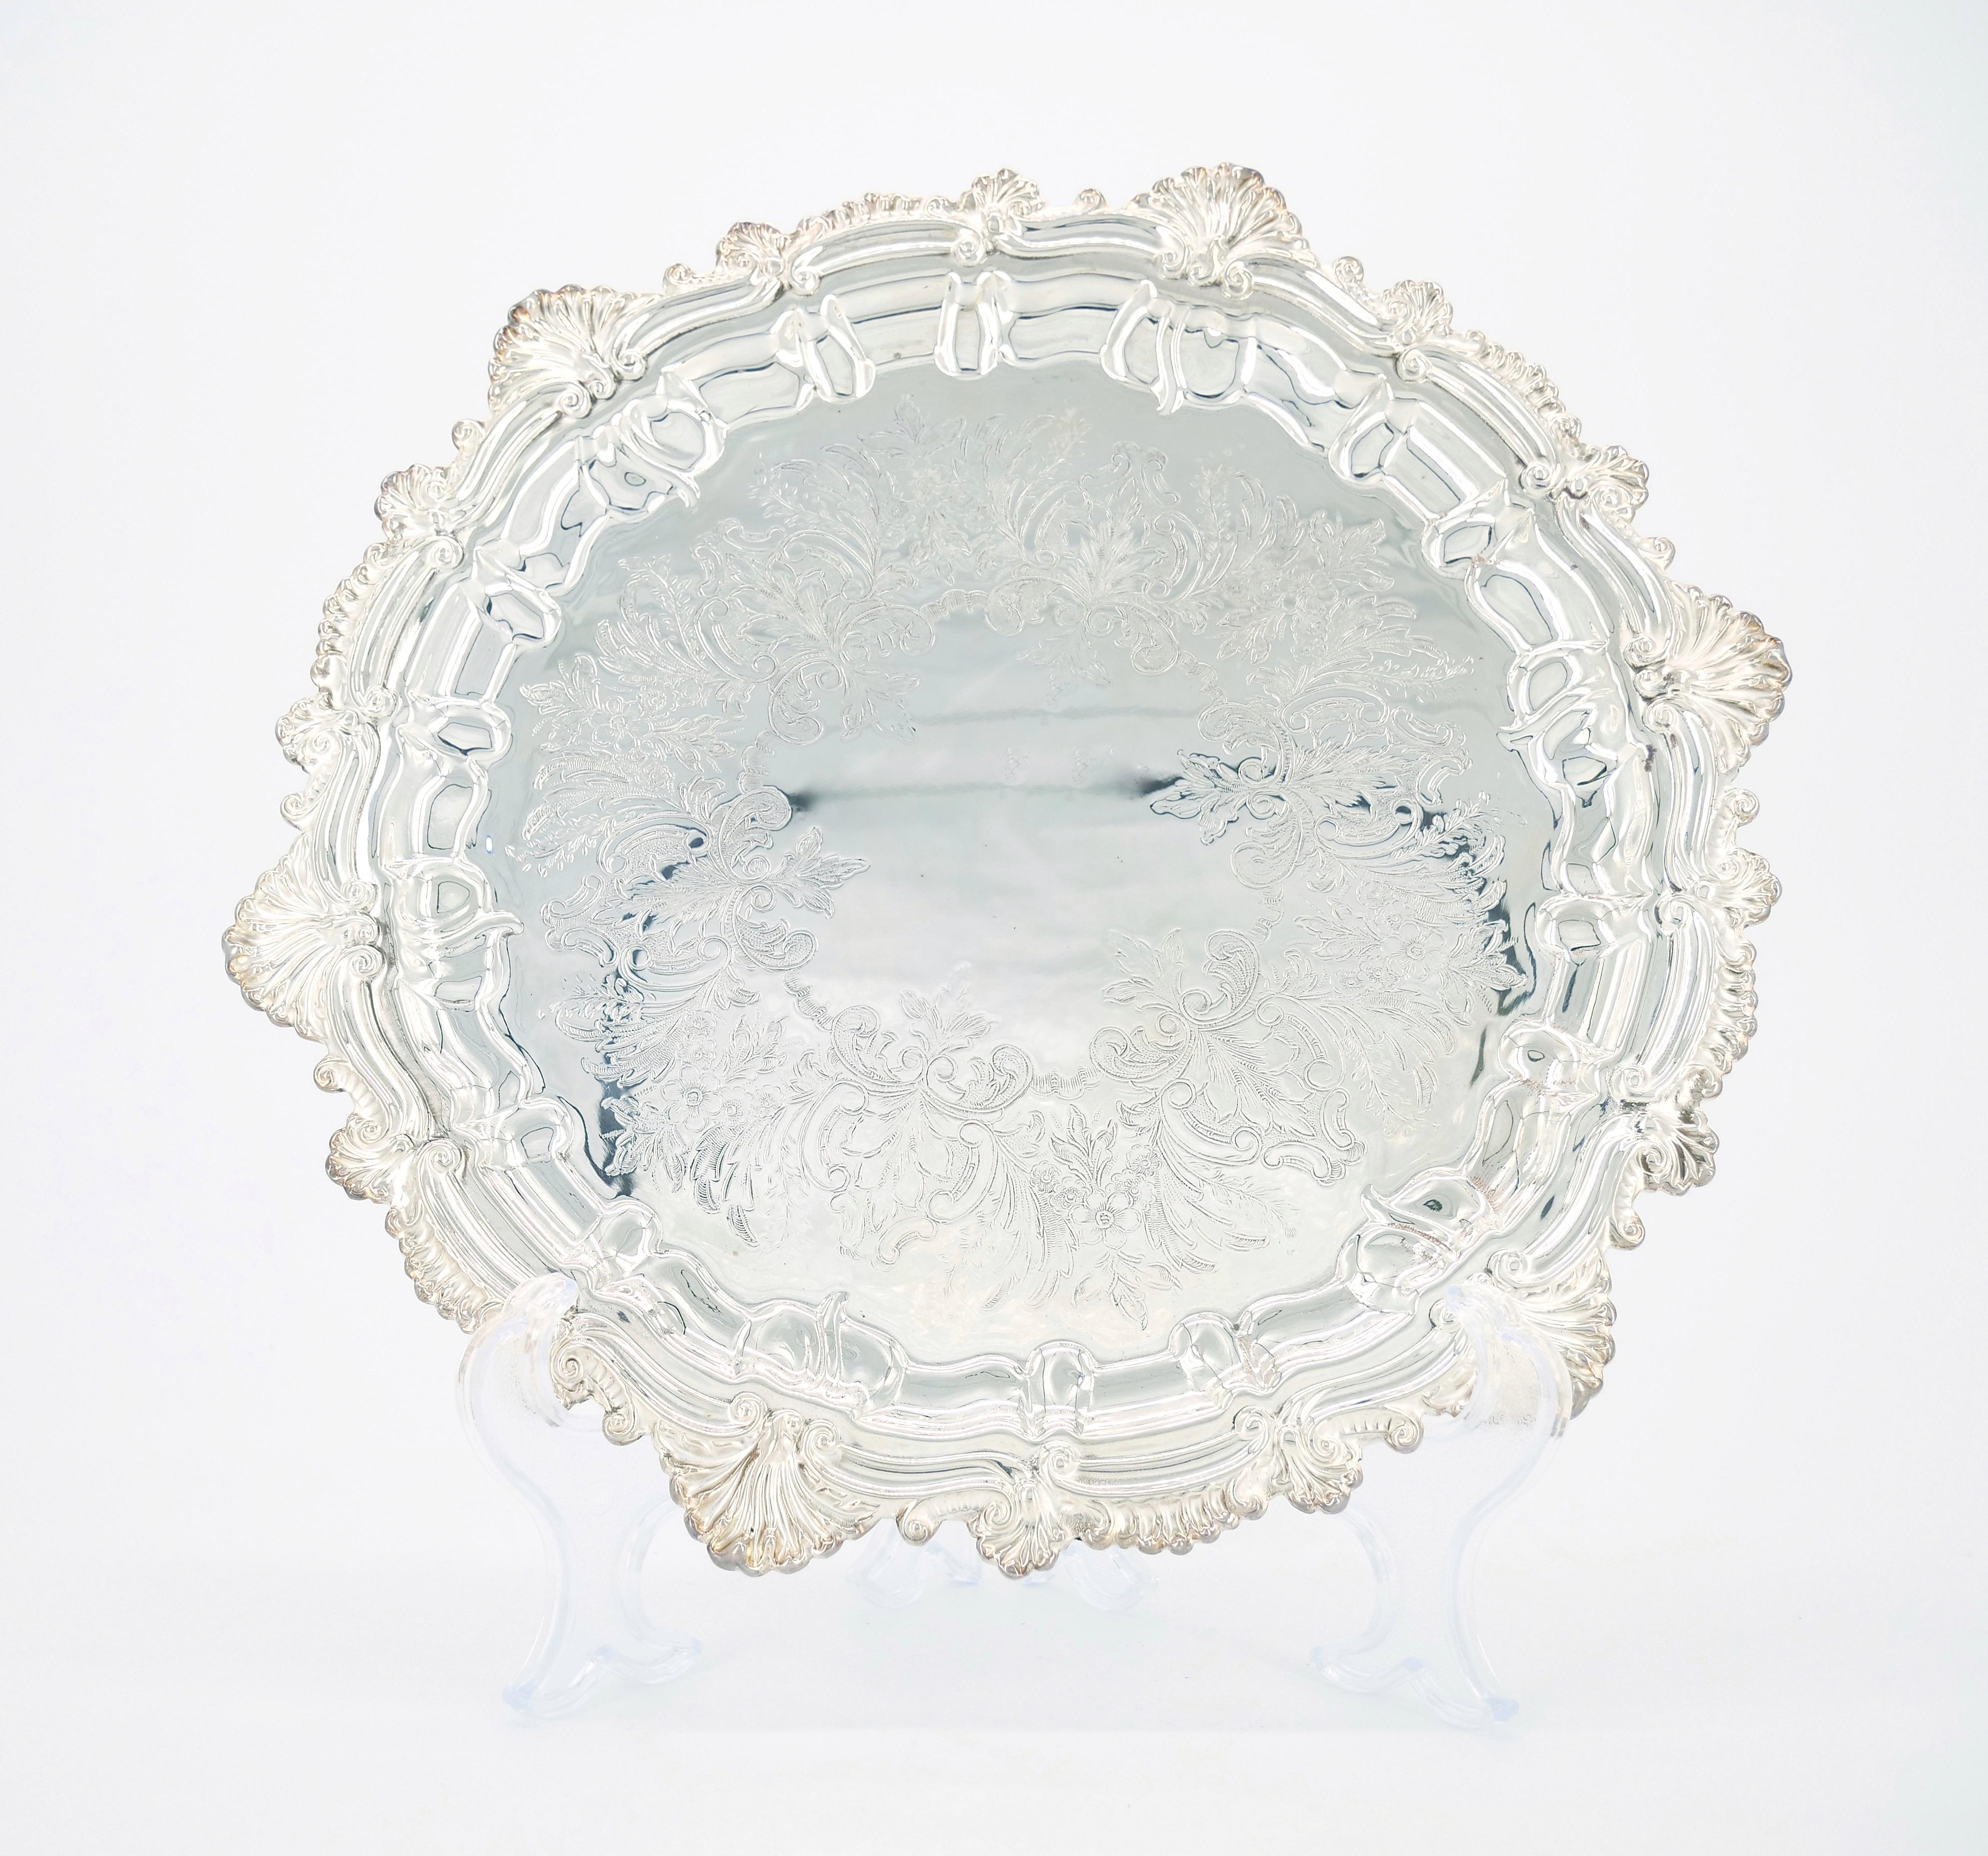 Introduce a touch of timeless elegance to your entertaining with this exquisite English Sheffield Silver Plate serving tray. The round shape is adorned with delicately engraved floral design details on the interior, creating a sophisticated and